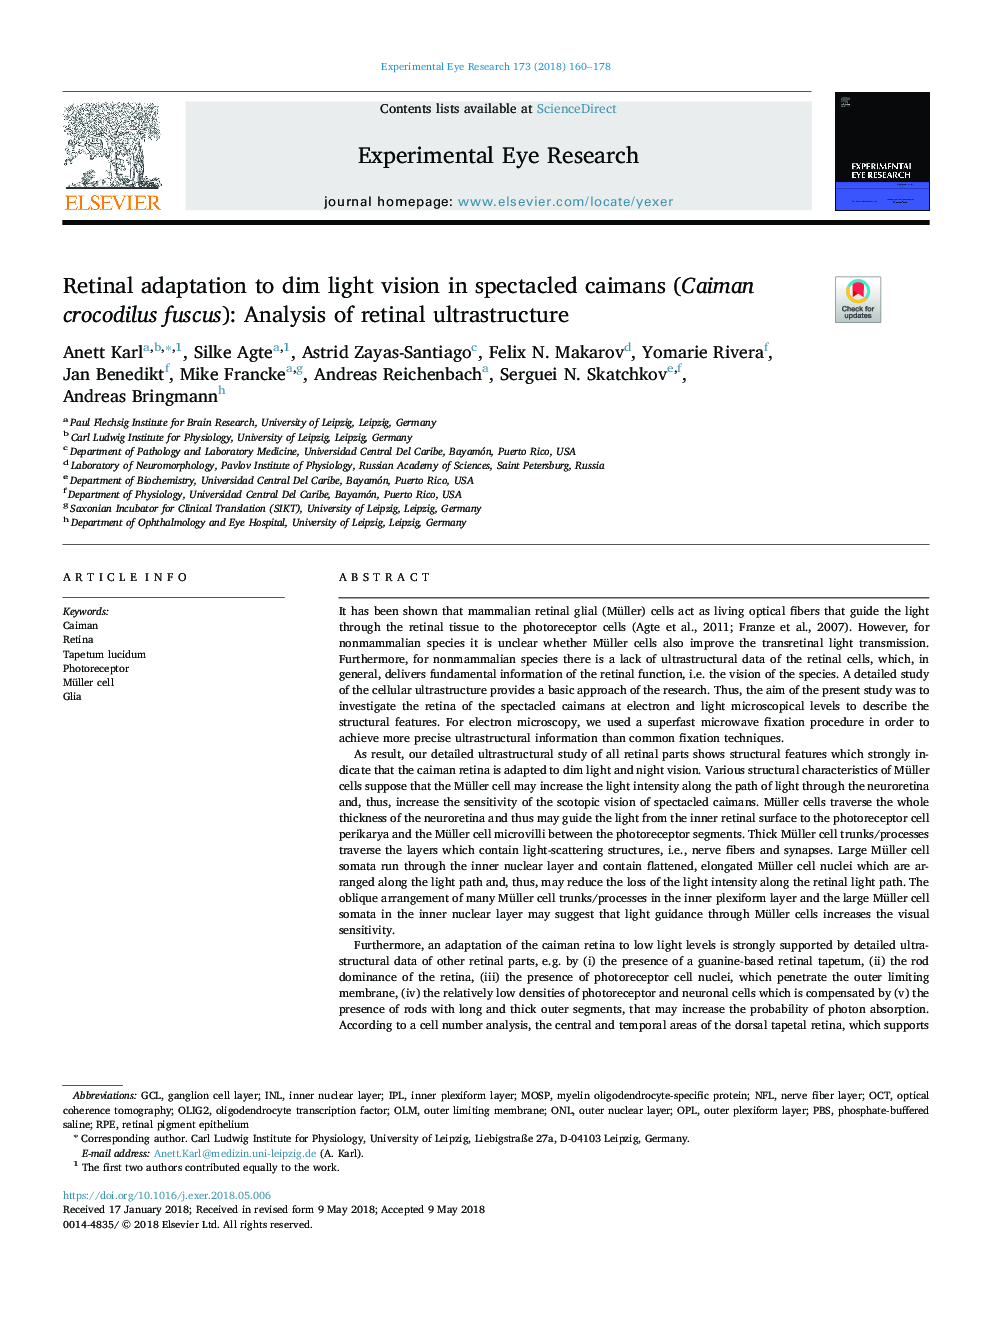 Retinal adaptation to dim light vision in spectacled caimans (Caiman crocodilus fuscus): Analysis of retinal ultrastructure